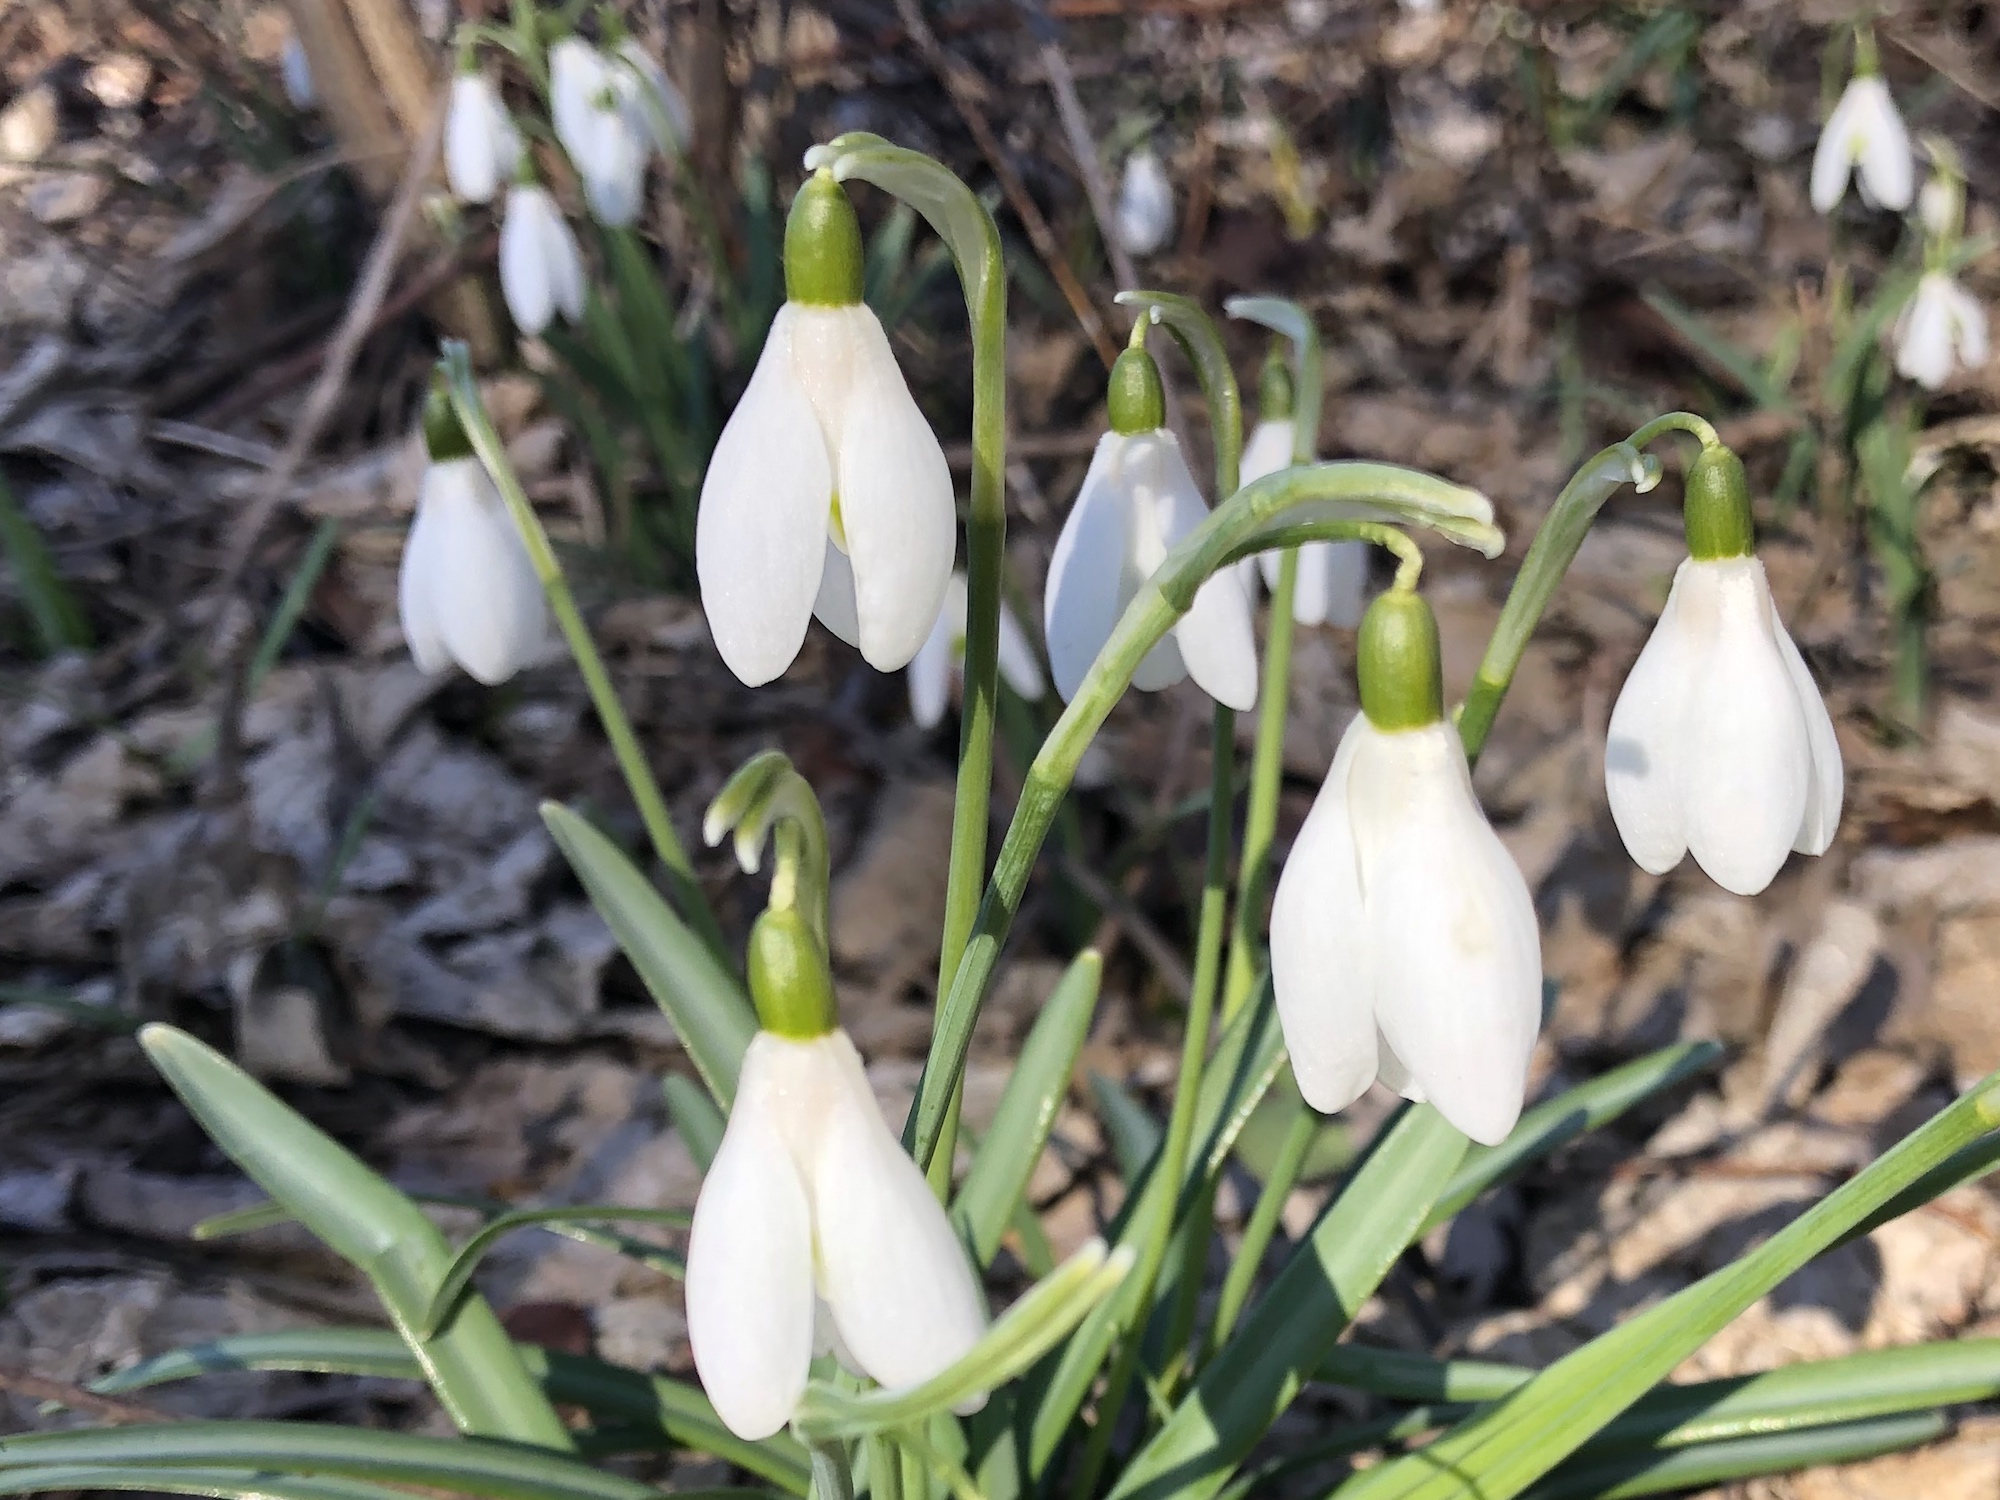 Snowdrops in woods between the Sycamore Tree on Arbor Drive and the bike path entrance to the Oak Savanna on March 15, 2020.